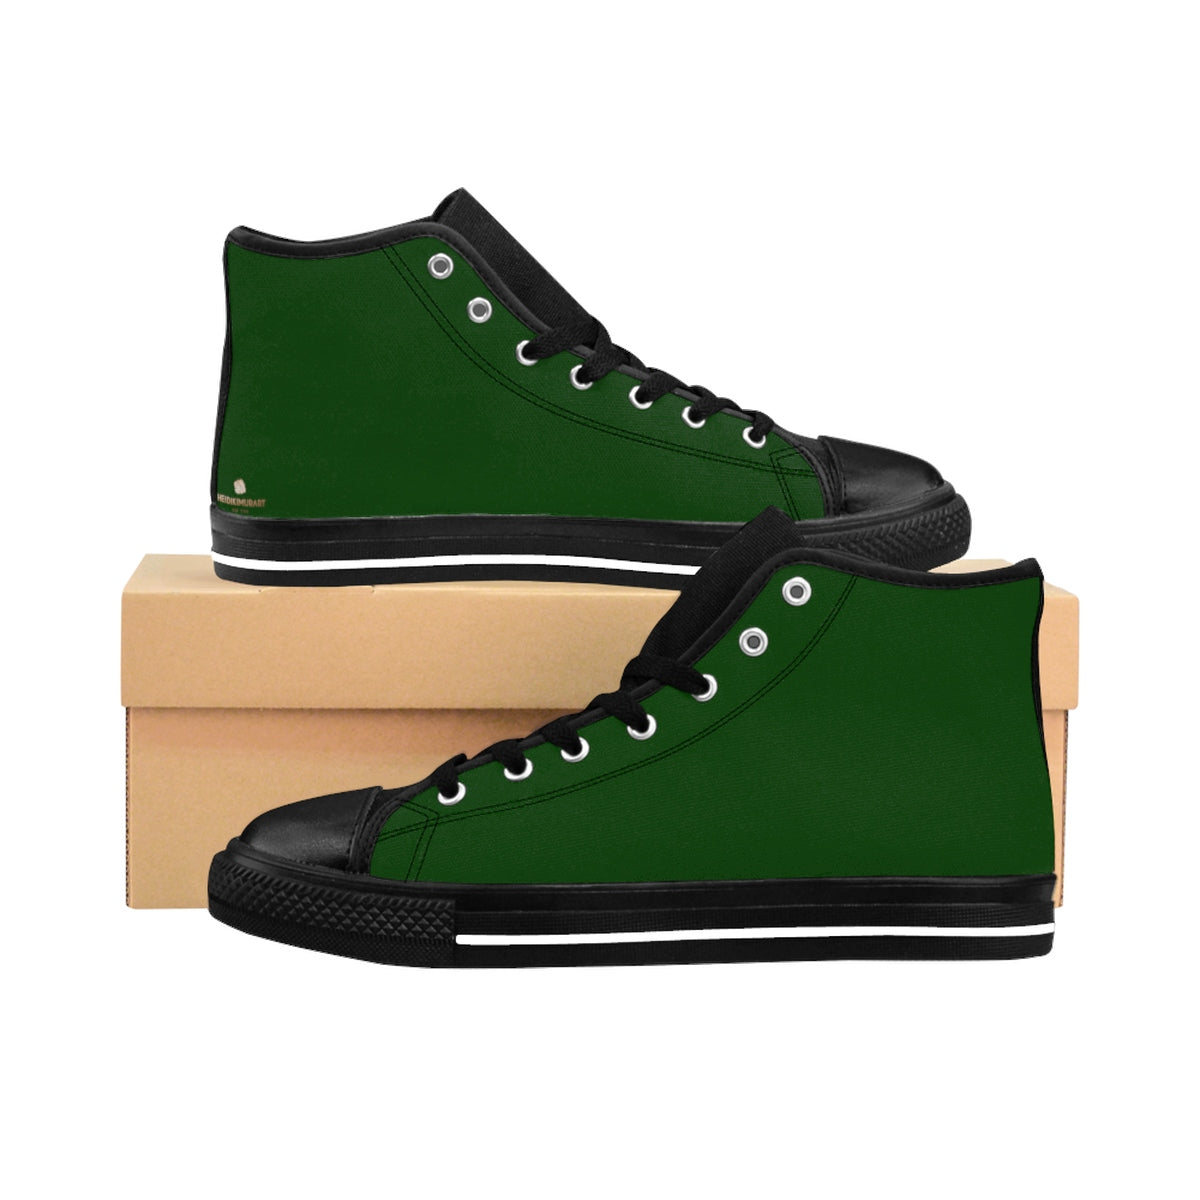 Evergreen Forest Green Solid Color Women's High Top Sneakers Running Shoes-Women's High Top Sneakers-US 9-Heidi Kimura Art LLC Green Women's High Top Sneakers, Evergreen Forest Green Solid Color Women's High Top Sneakers Running Shoes (US Size: 6-12) Designed in the USA